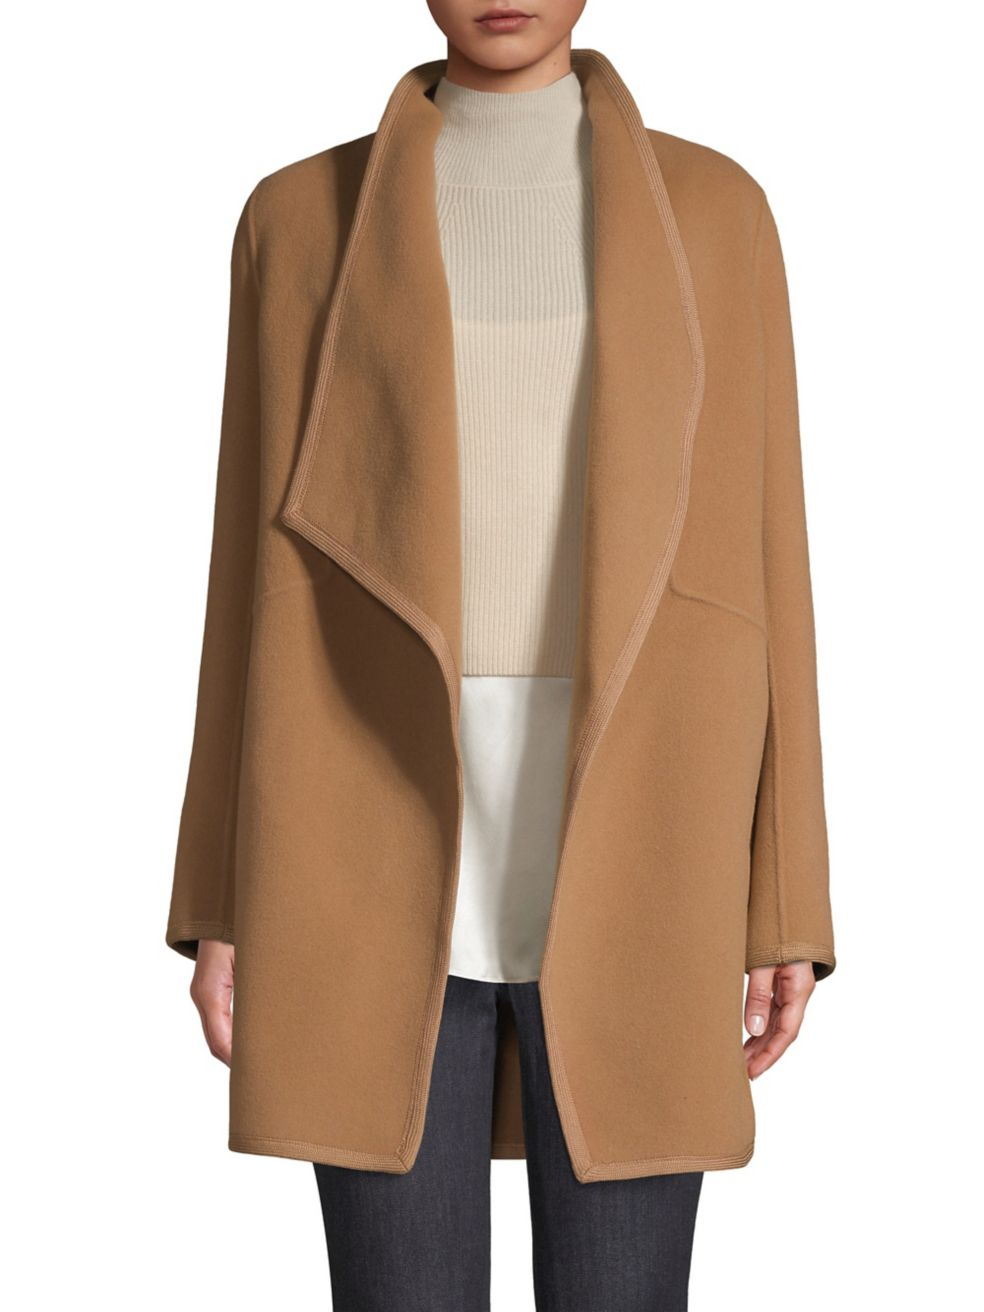 Elie Tahari - Christina Double Face Wool Car Coat | ABOUT ICONS